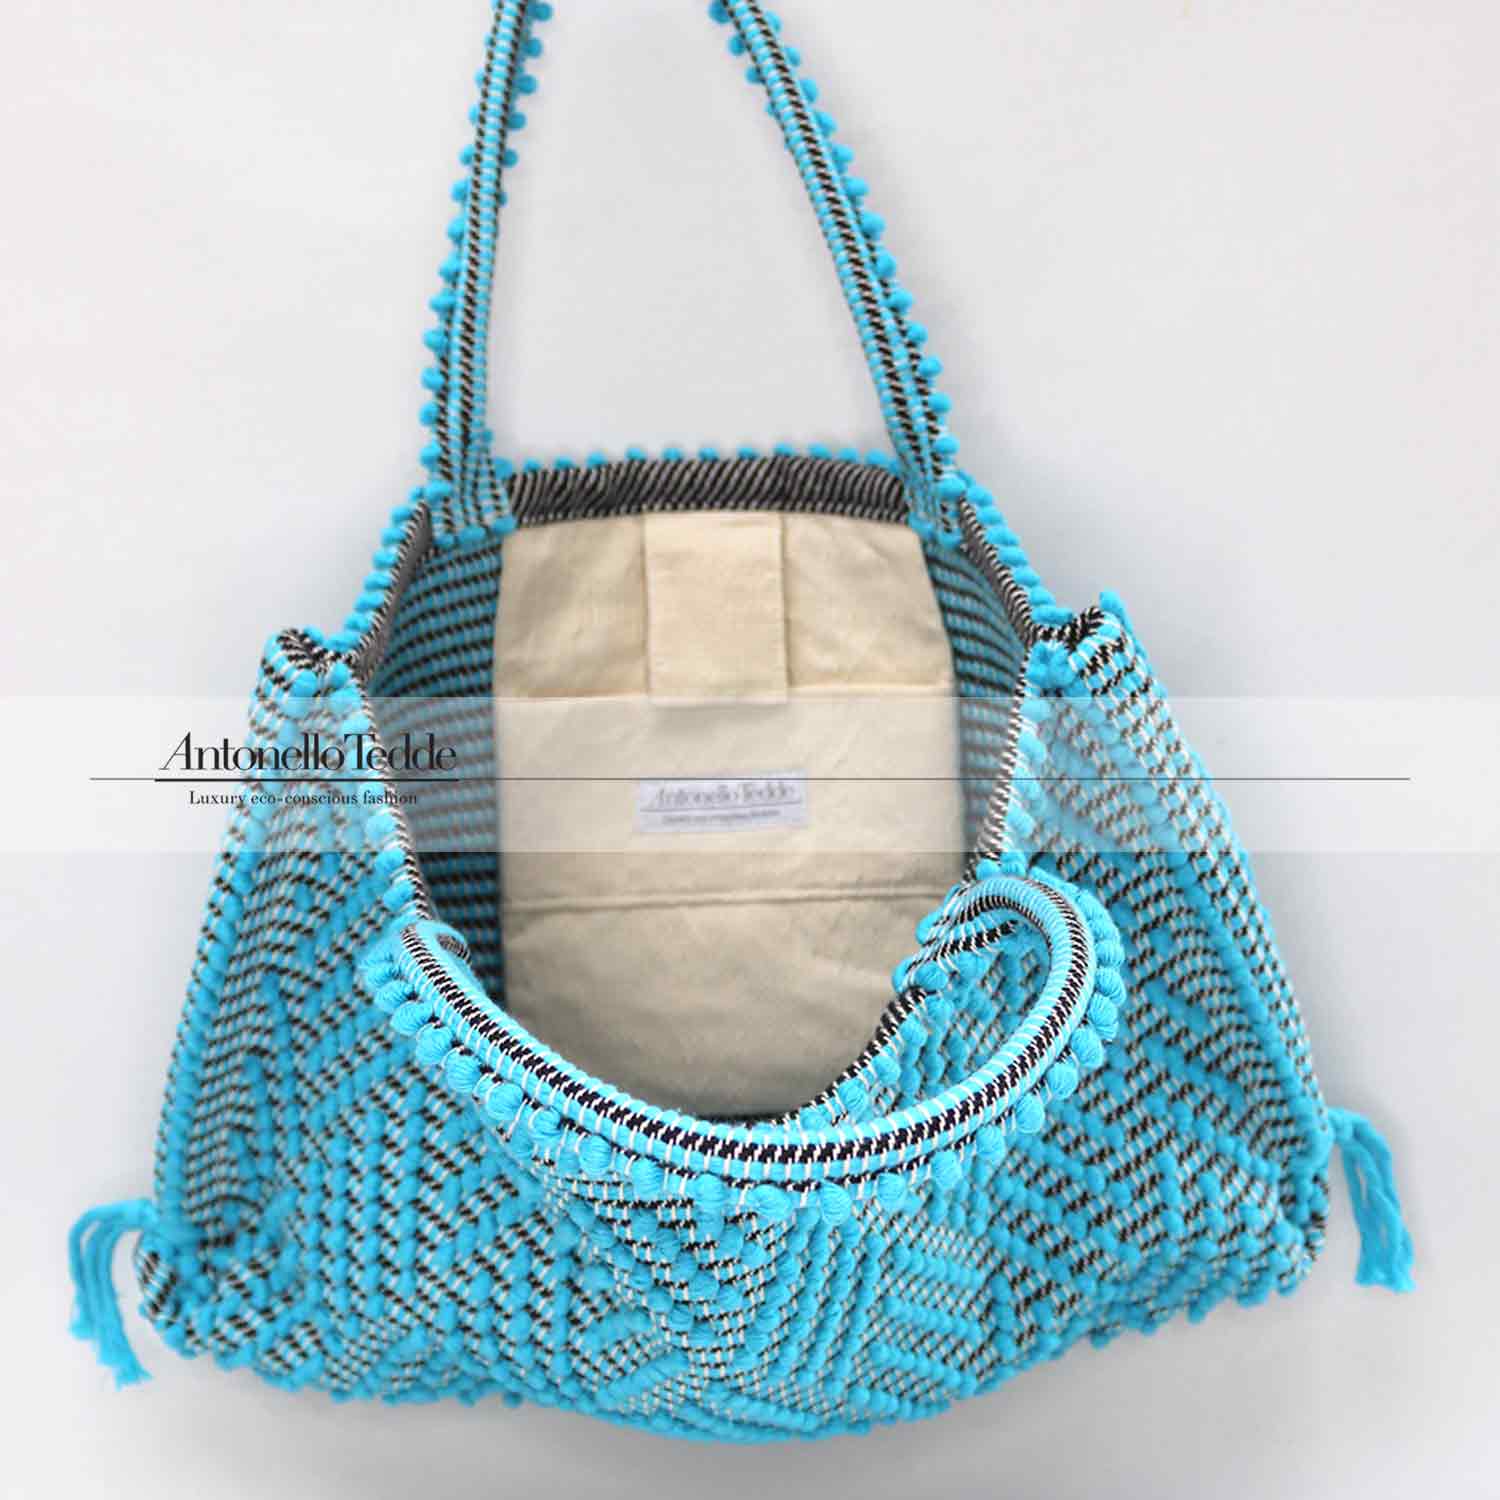 Capriccioli Medium zig zag- The bag is made using authentic Sardinian hand weaving methods in ethically managed factories. This tote bag is extraordinary and evokes faraway cultures with a contemporary touch, with focus on details such as colour, and material that are sustainable and eco-conscious